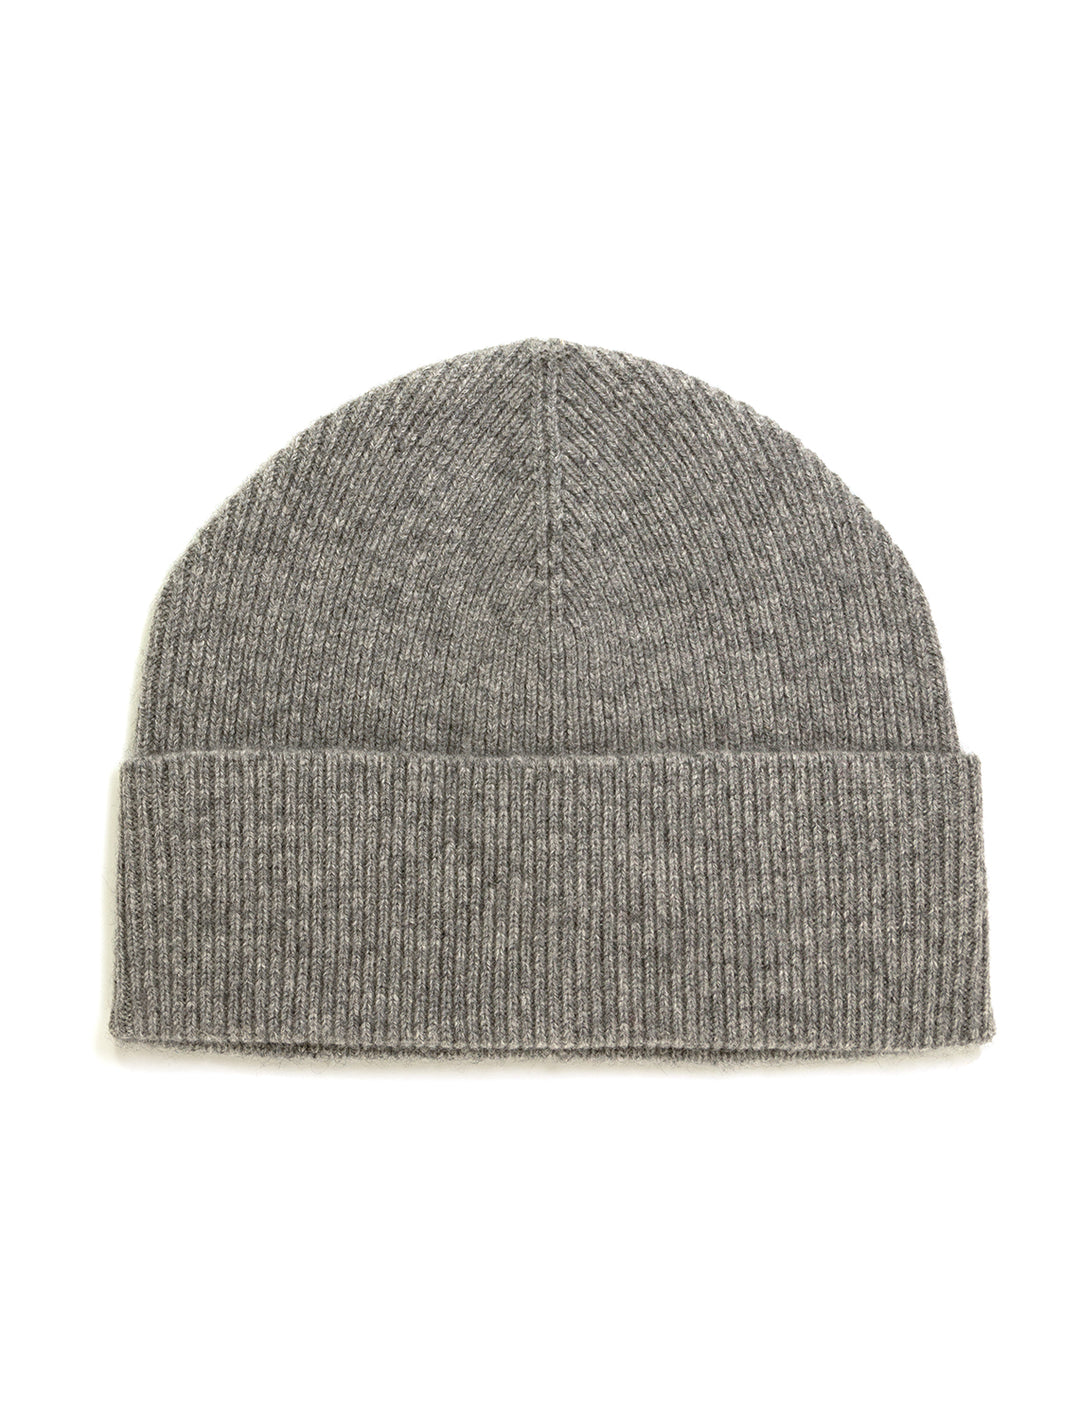 Front view of Jumper 1234's ribbed turnback hat in mid grey.